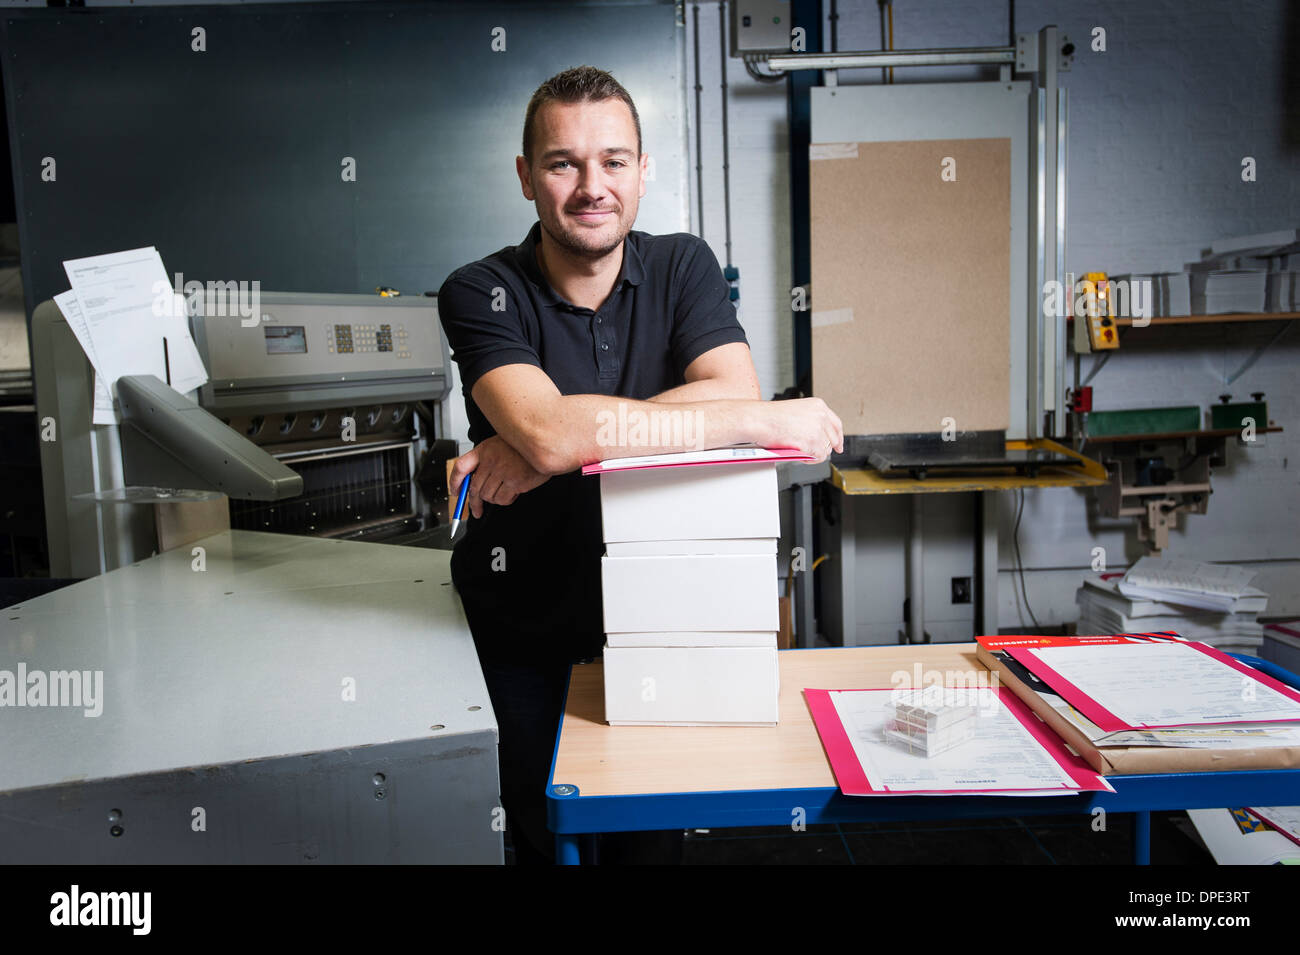 Portrait of worker in paper printing workshop Stock Photo